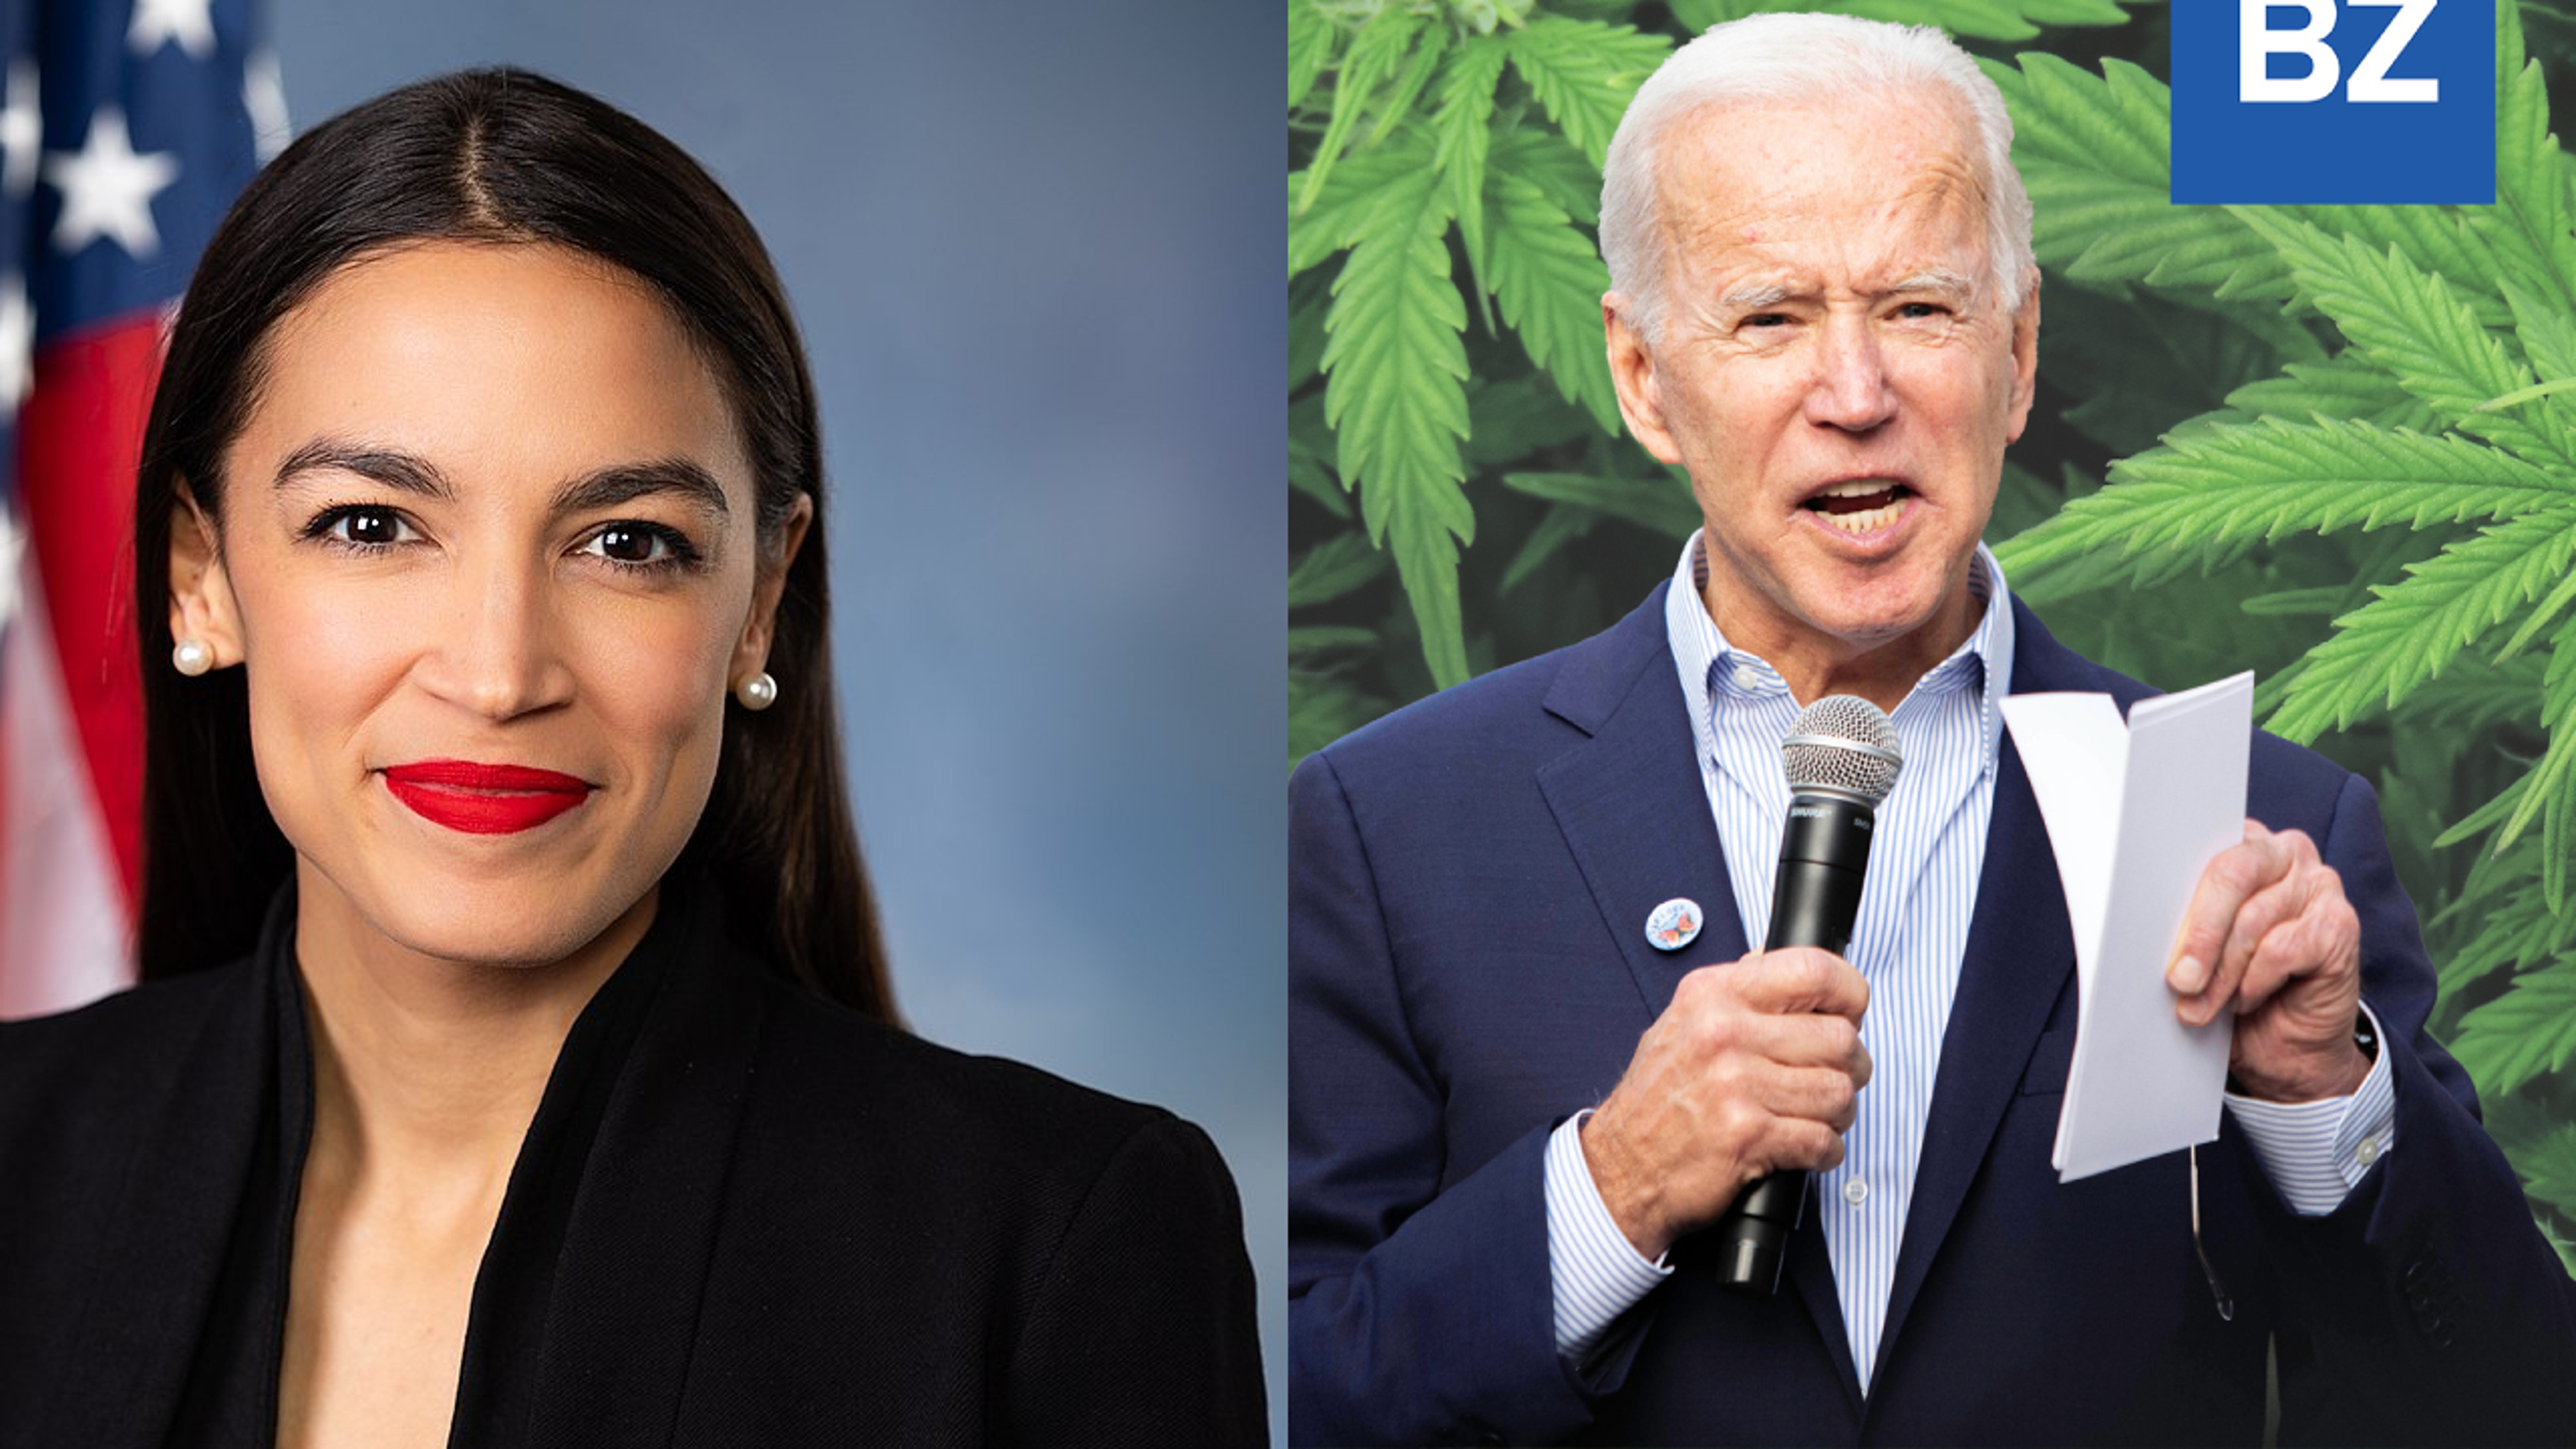 AOC &amp; Group Of Democrats Urge Biden To Pardon Cannabis Offenses For Illegal Immigrants, Reopen Deportation Cases